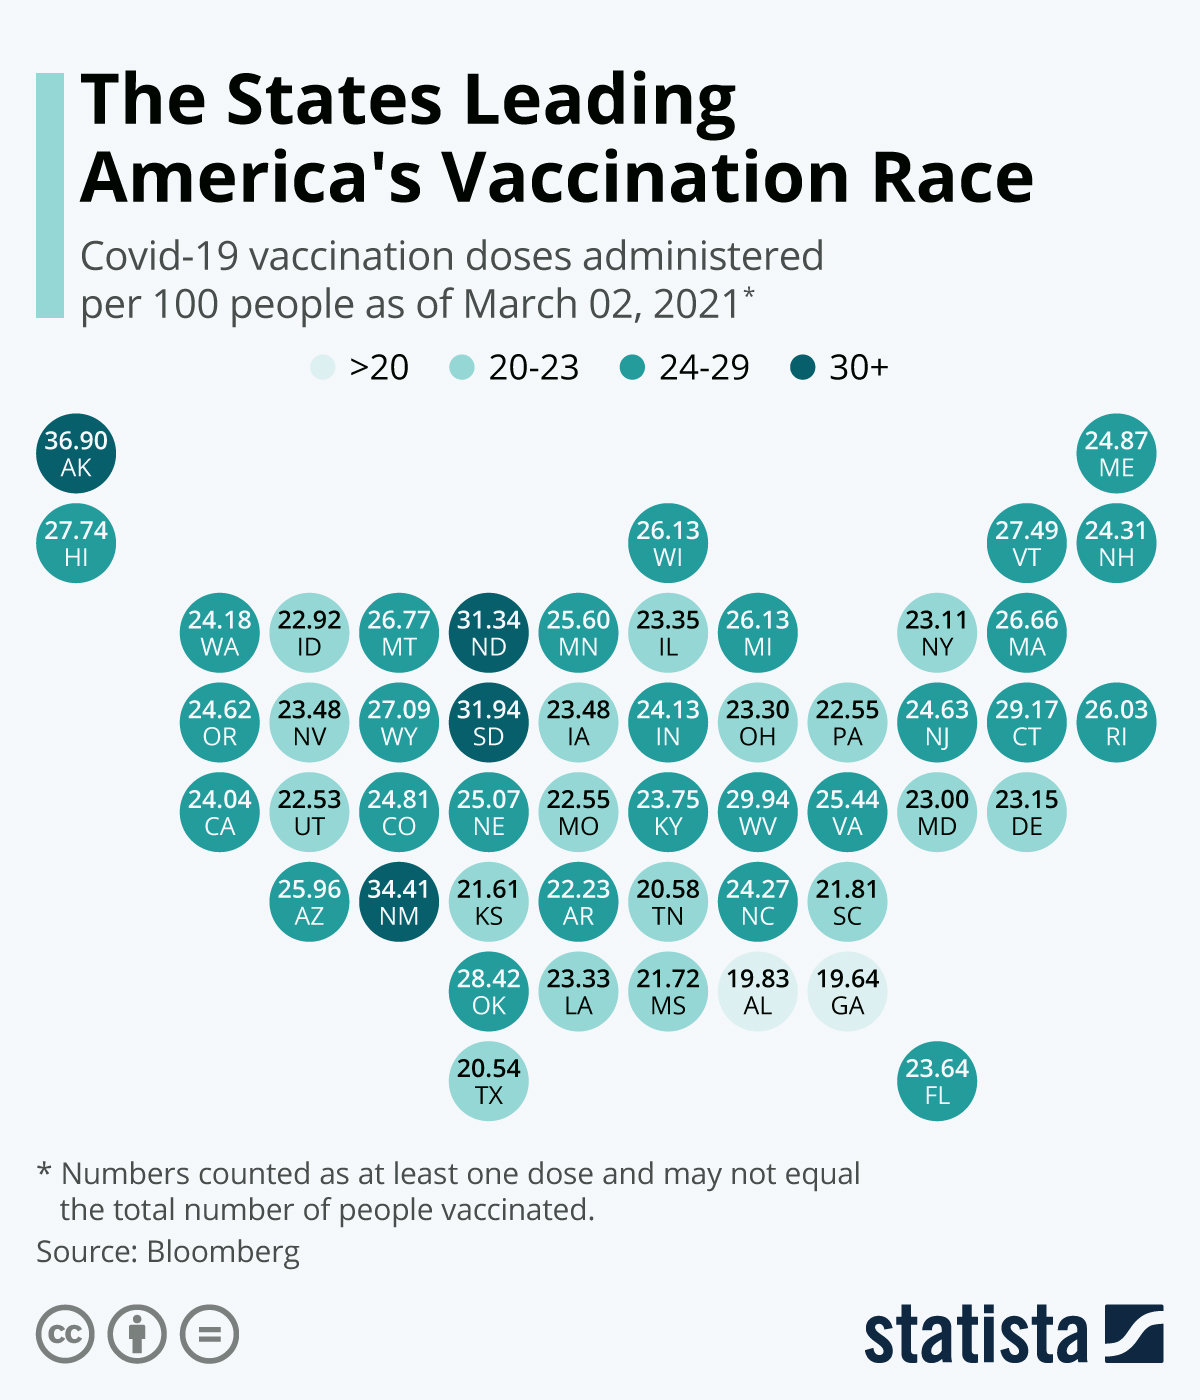 The States Leading America's Vaccination Race